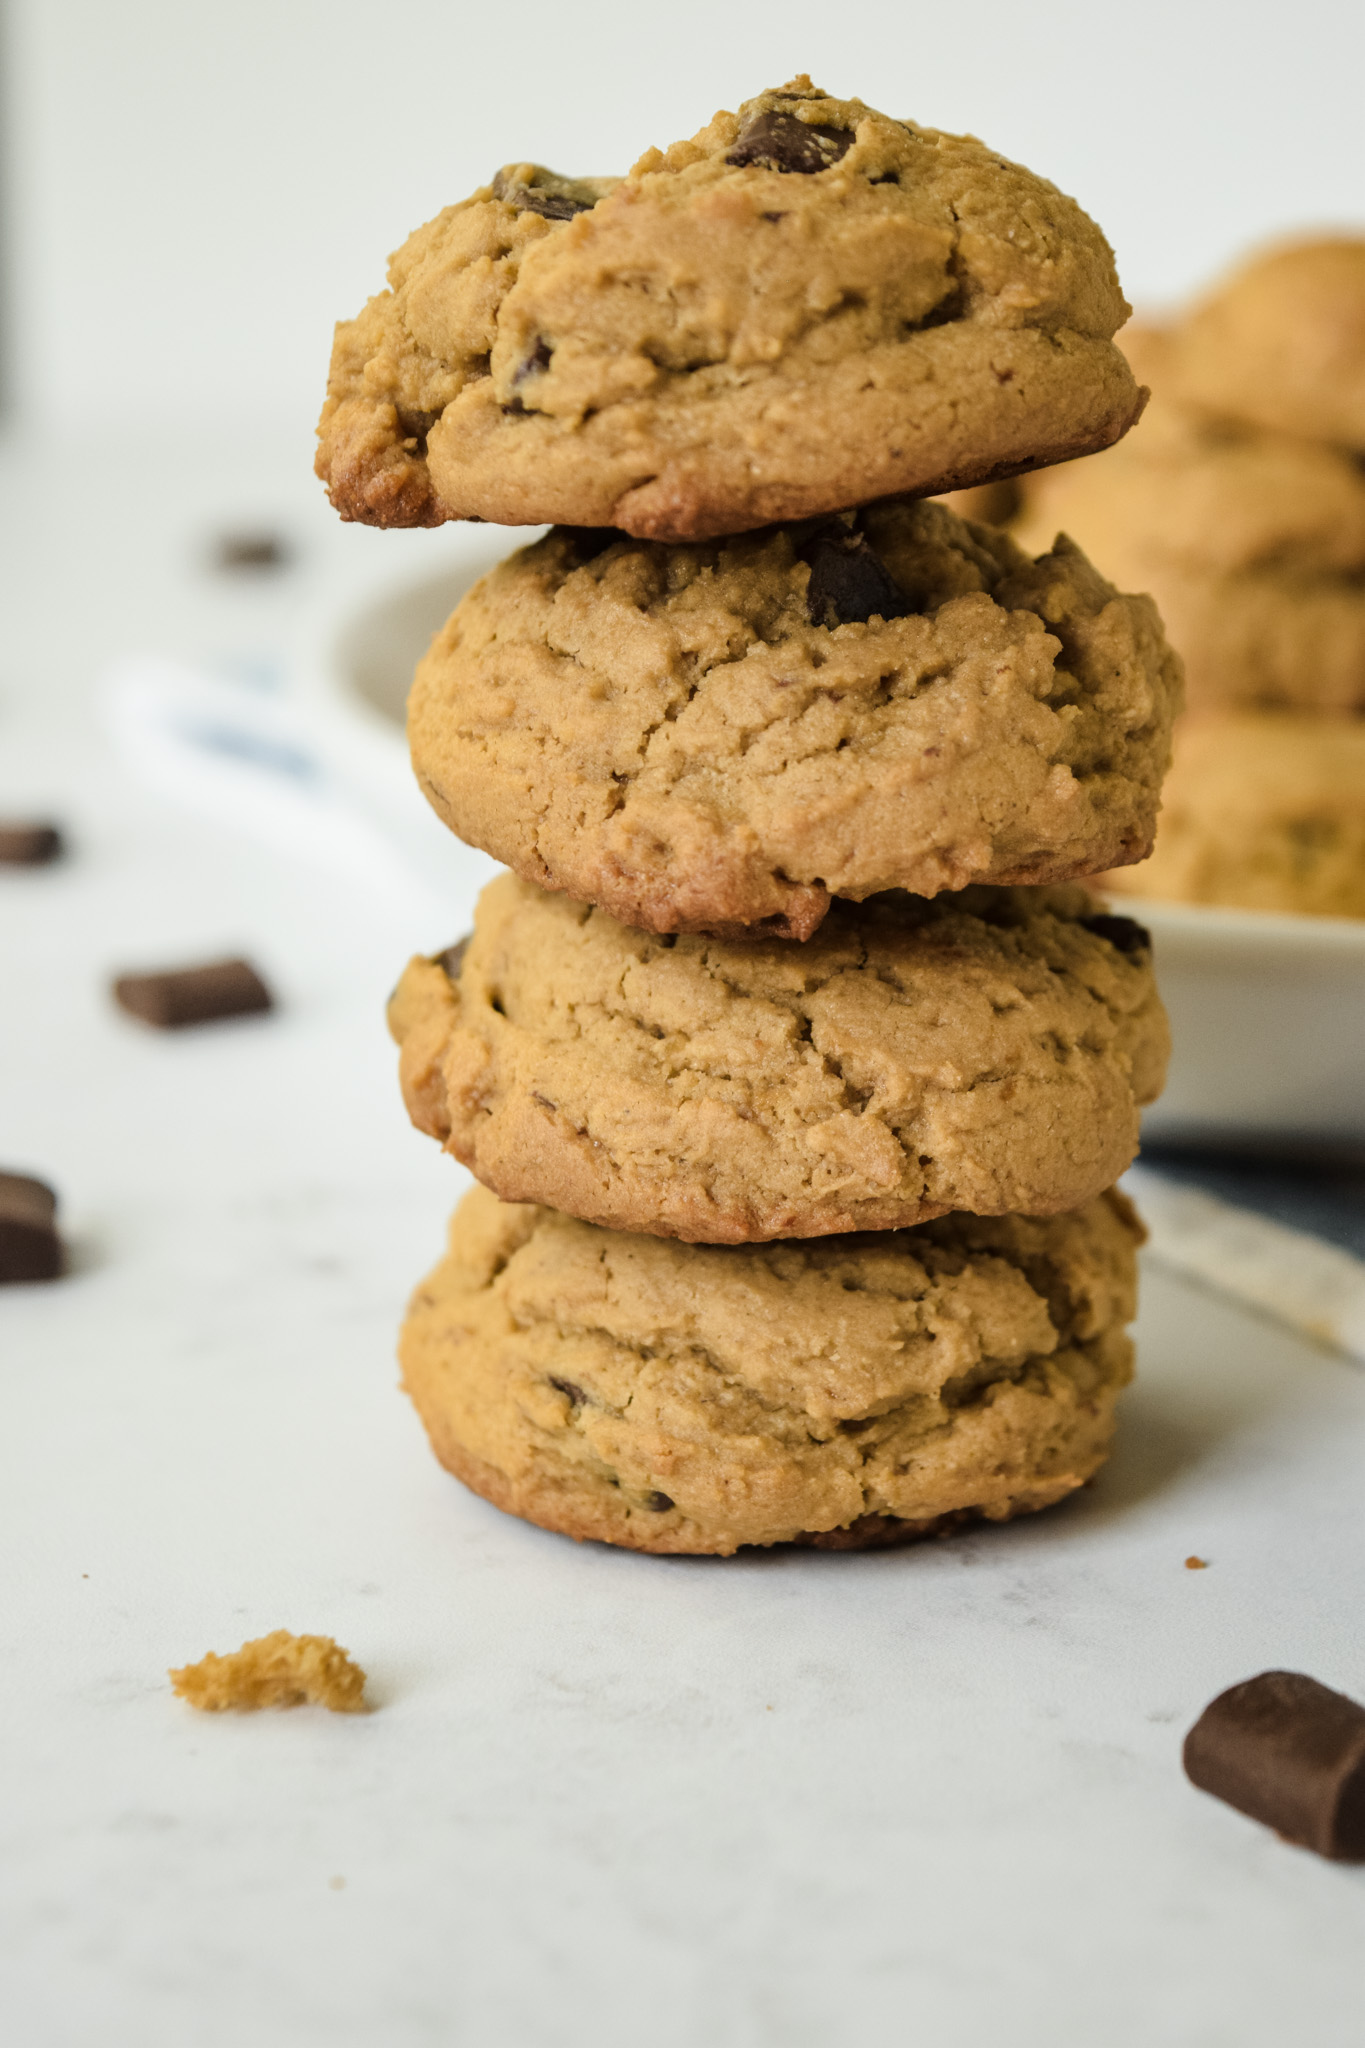 Stack of Miso Chocolate Chip Cookies from Katie Lee